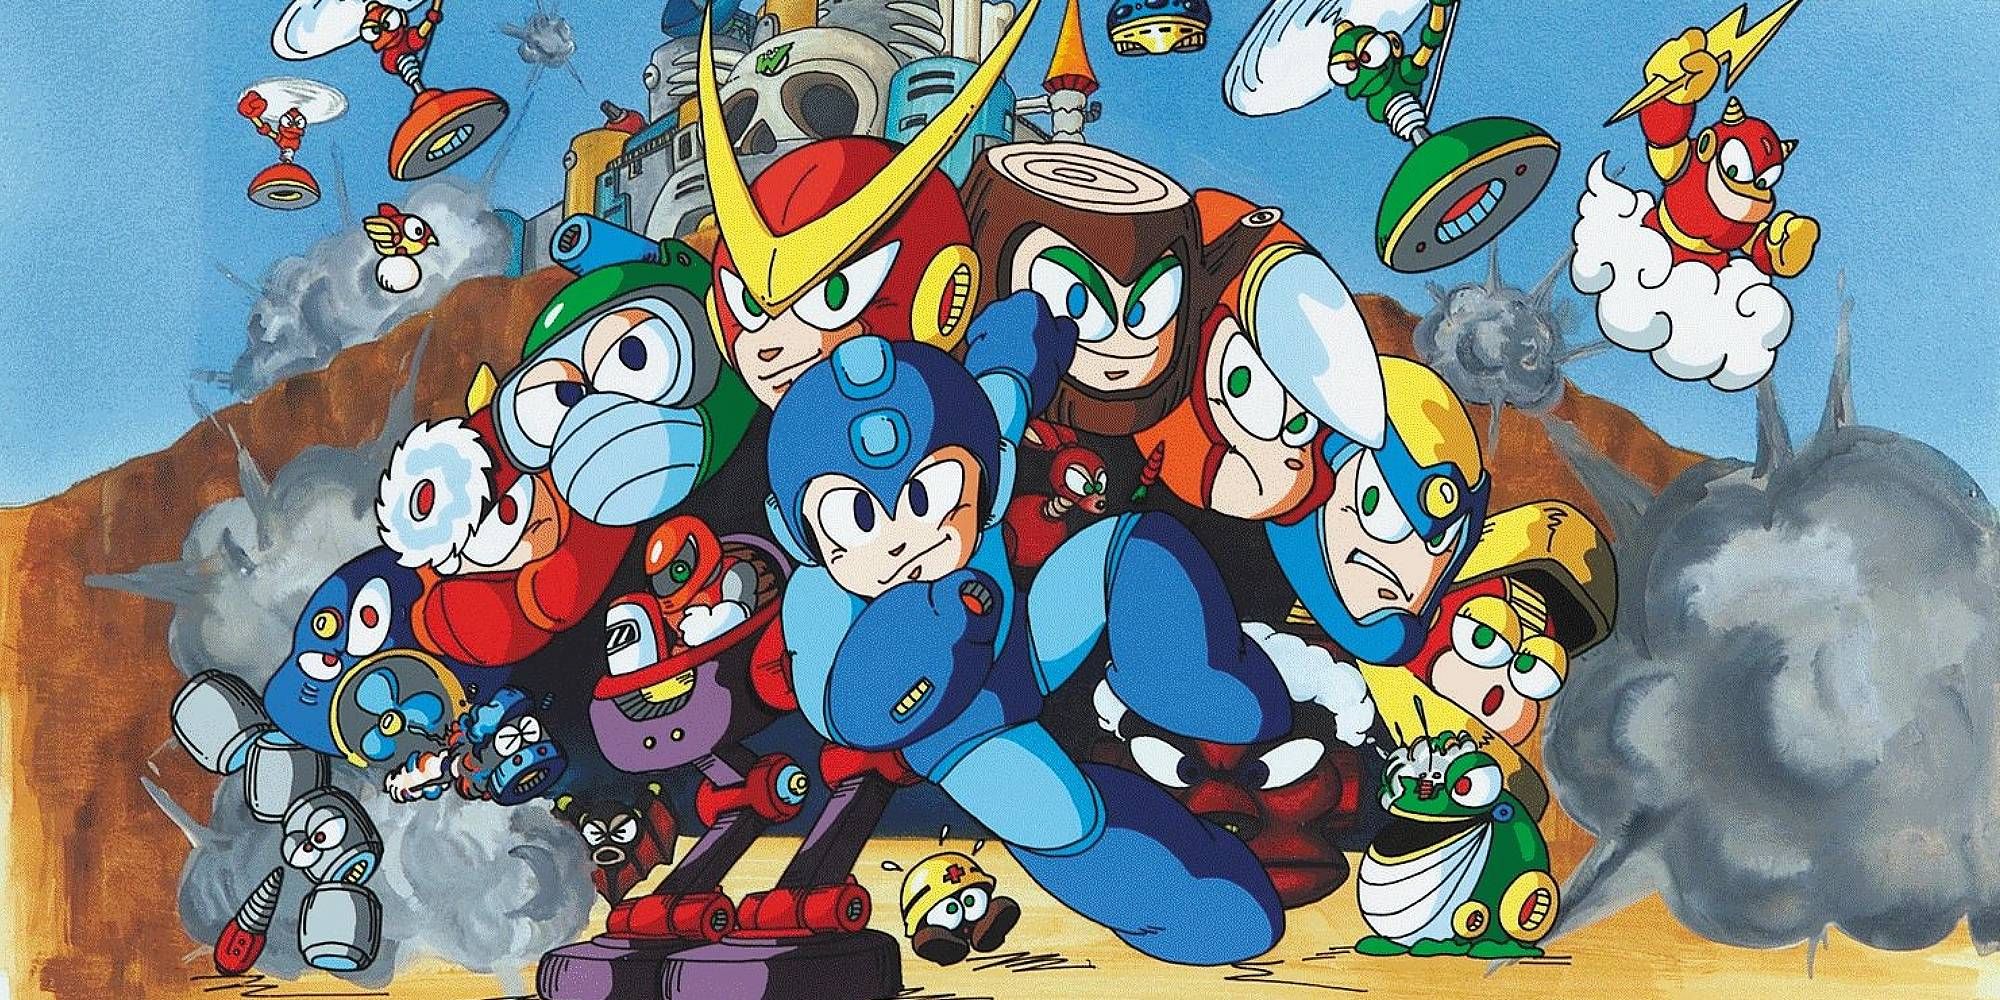 Mega Man poses with various boss characters from the game